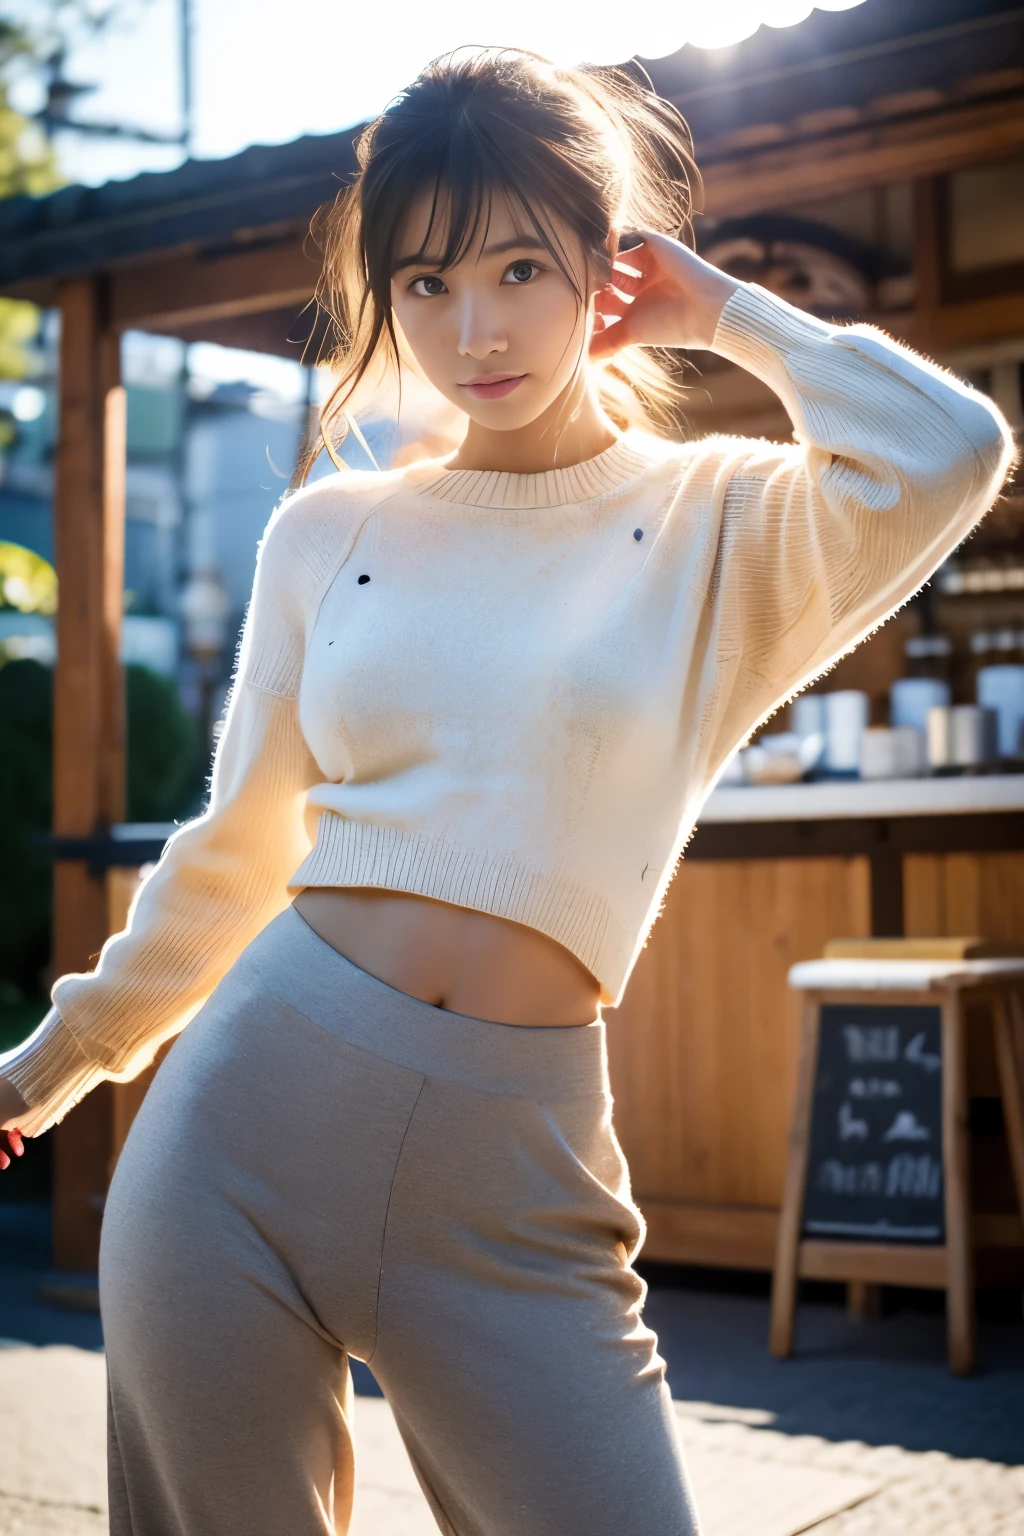 (((Wear a light knit)))、(((unique pants style))),(((1 Girl))),Full Body Shot、Japanese,16 years old, Medium Black Hair,I have a few freckles,Big Breasts、Work at a traditional Japanese food stall,Proper body balance,Ultra-high quality output images,High resolution,Intricate details,Her hair blowing in the wind is so delicate and beautiful,Realistic photos,dream-like,Professional Lighting,Realistic Shadows,Focus Only,Beautiful Hands,Beautiful fingers,Detailed characteristics of hair,Detailed facial features, Very good、White small high leg panties,Torn Skirt,,Dynamic pose、、